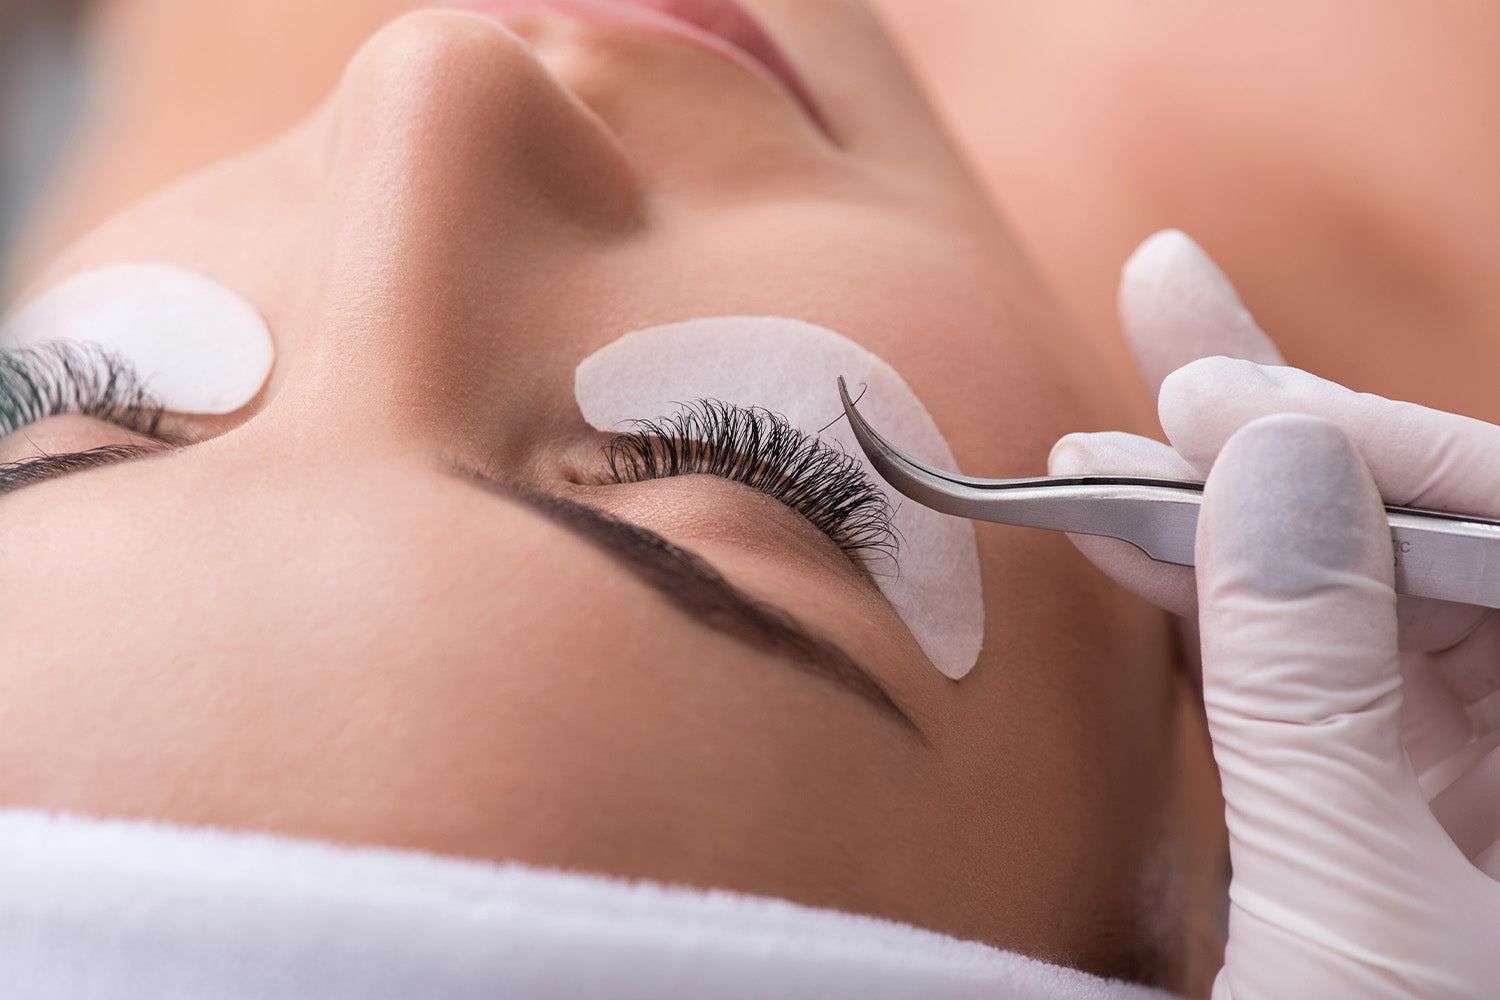 Do Lash Extensions Damage Your Lashes?